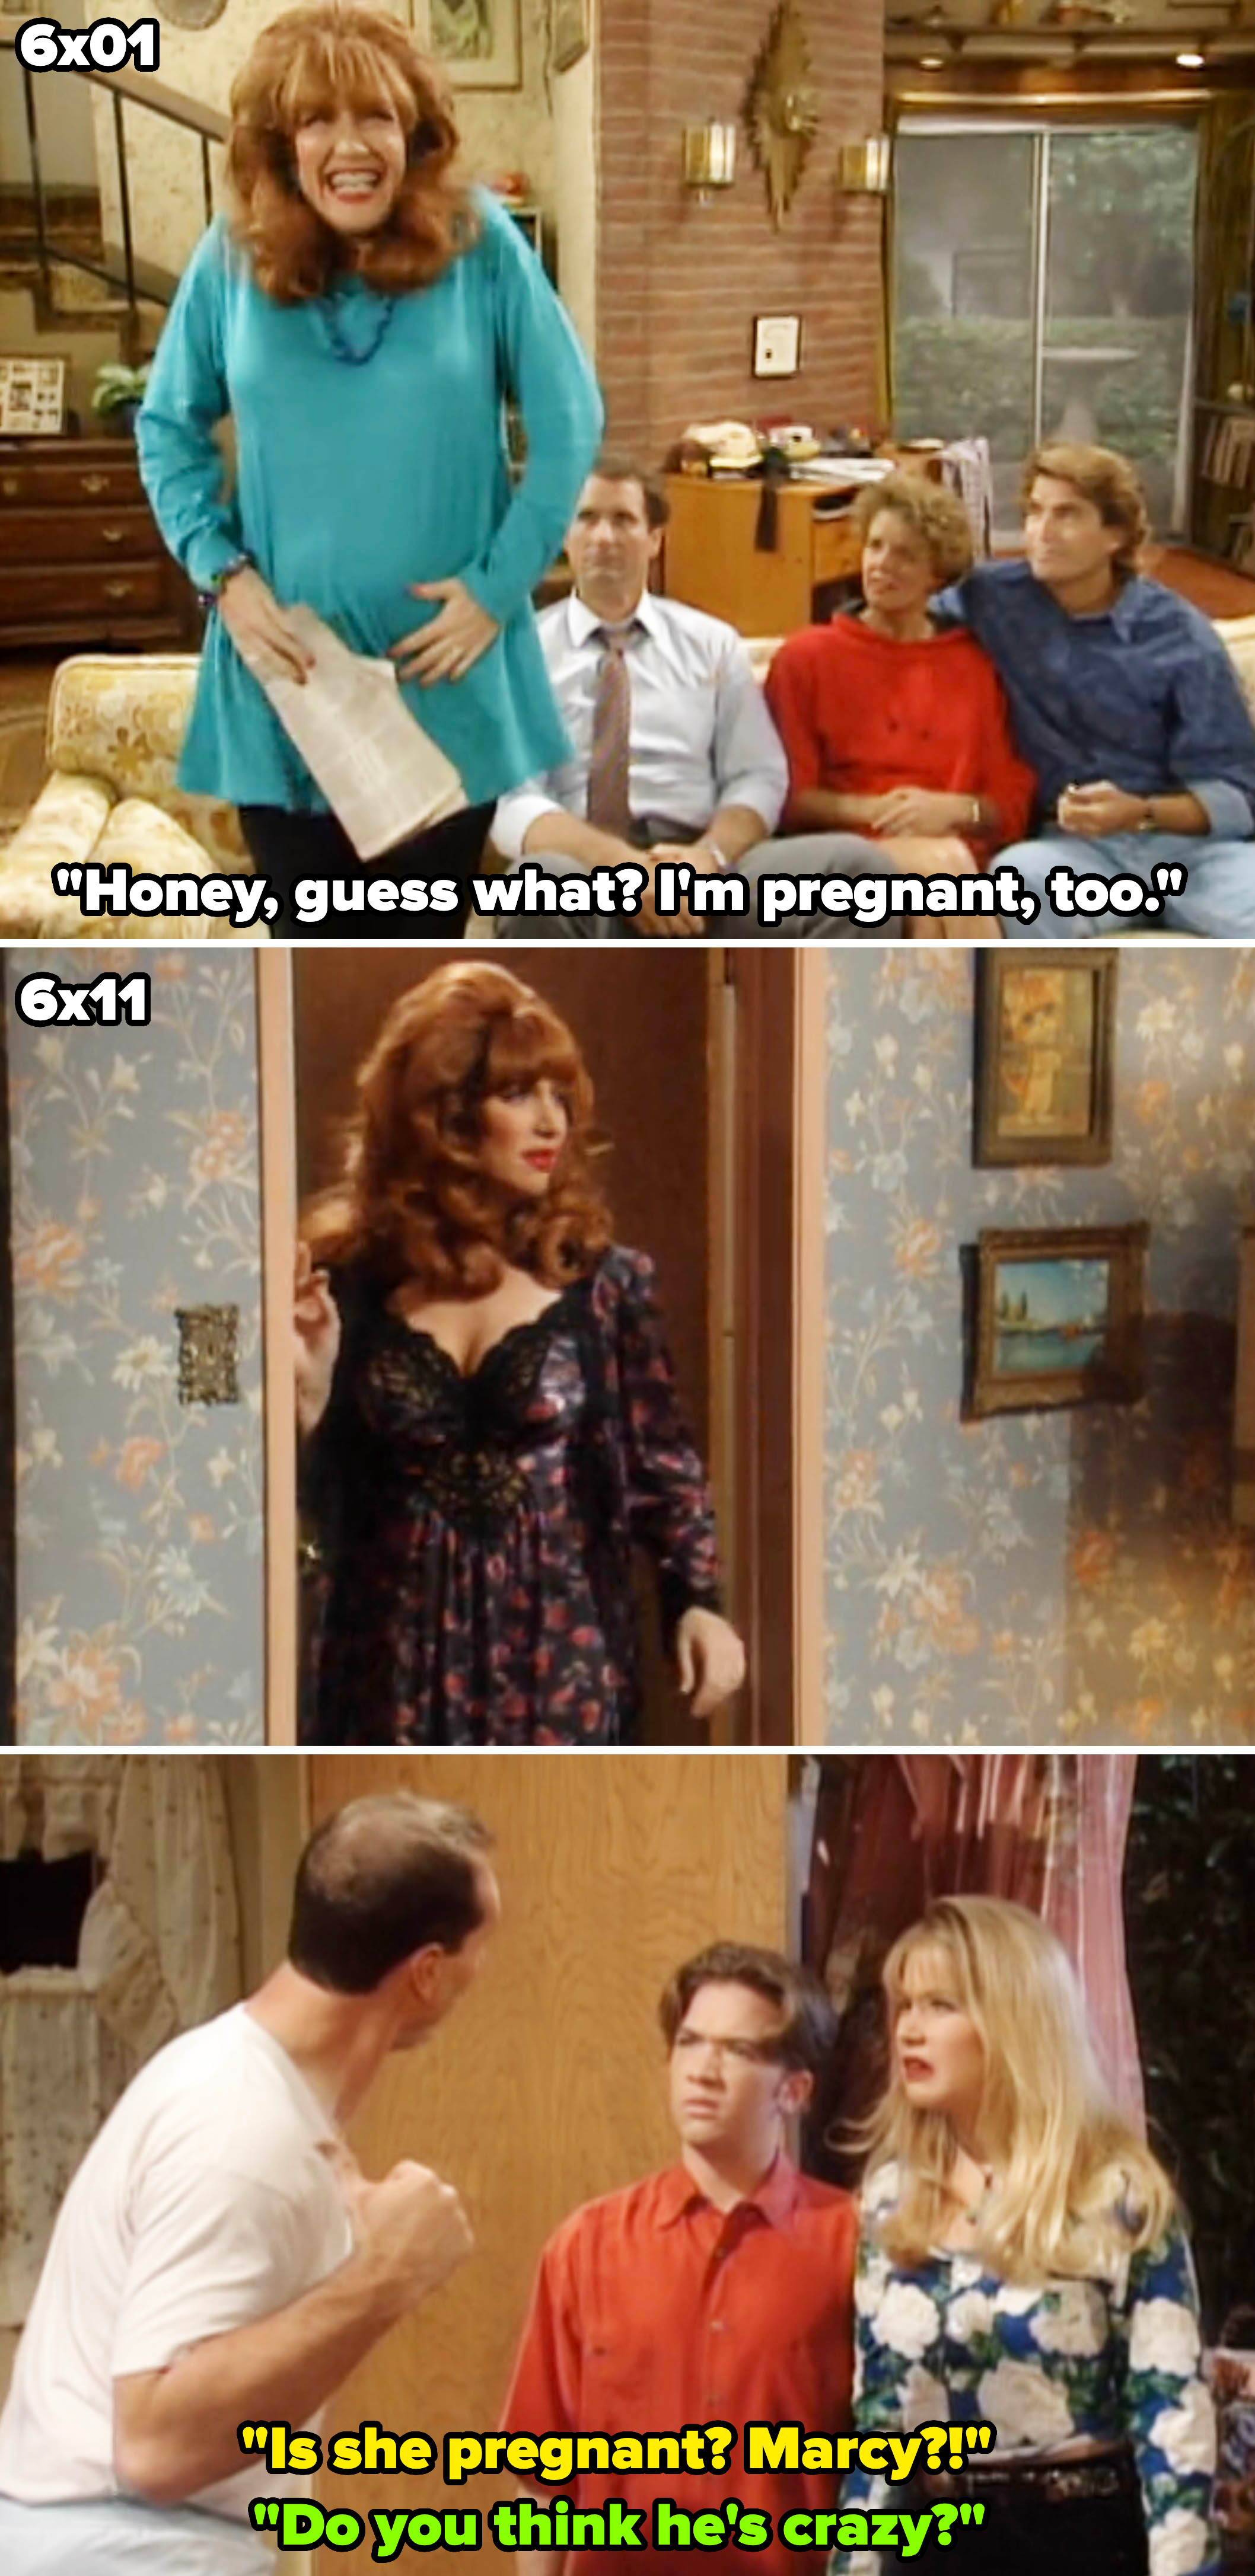 TV show &quot;Married with Children&quot; cast in different scenes, including characters Peg, Al, Kelly, and Bud Bundy